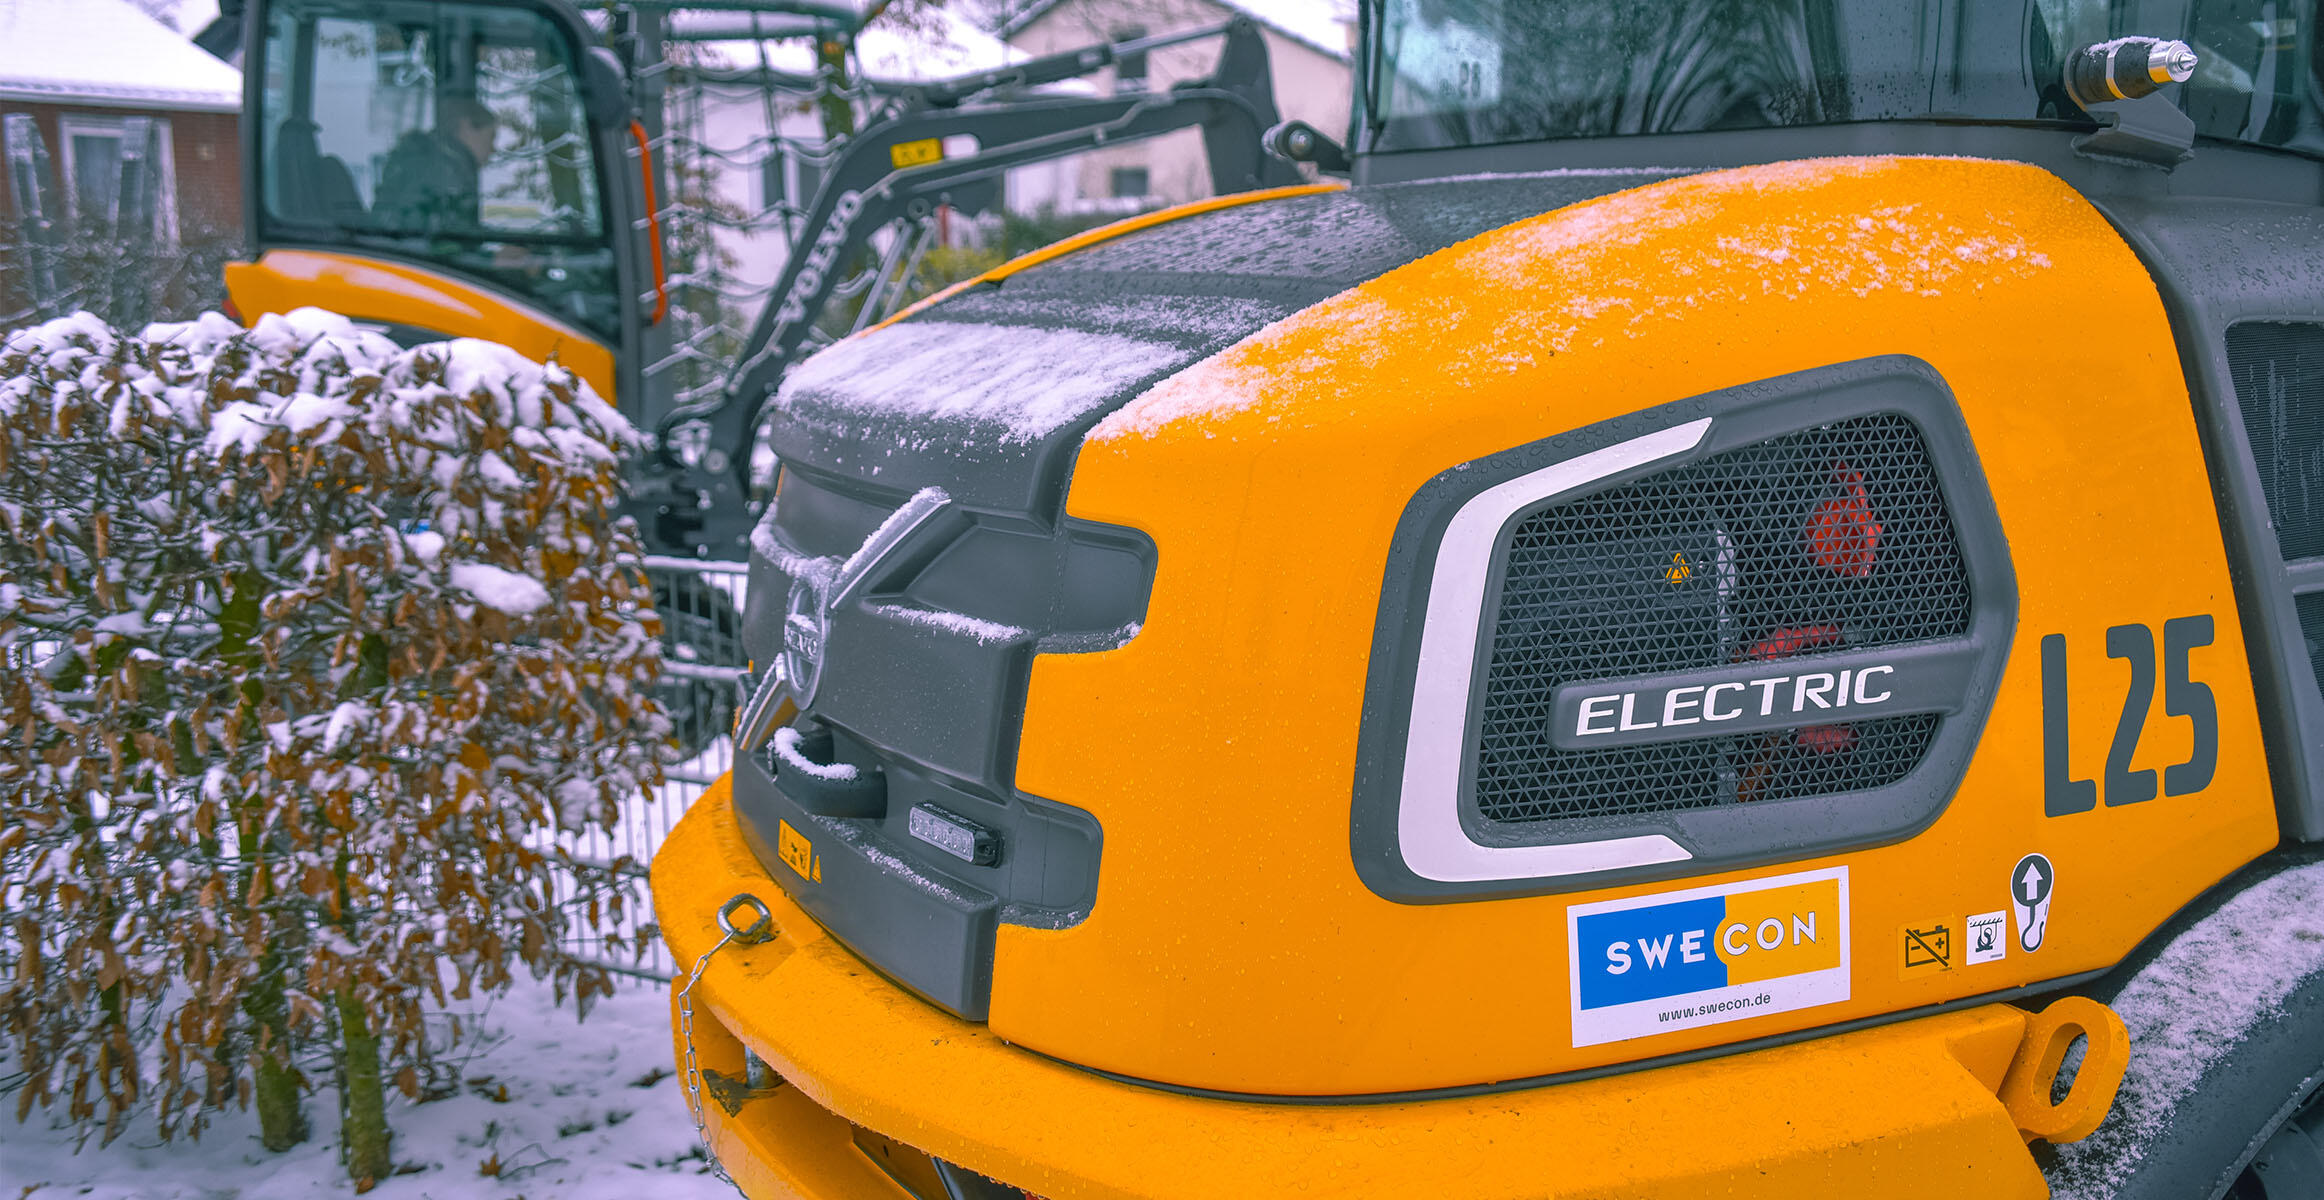 The L25 Electric was put to work alongside the ECR25 Electric 